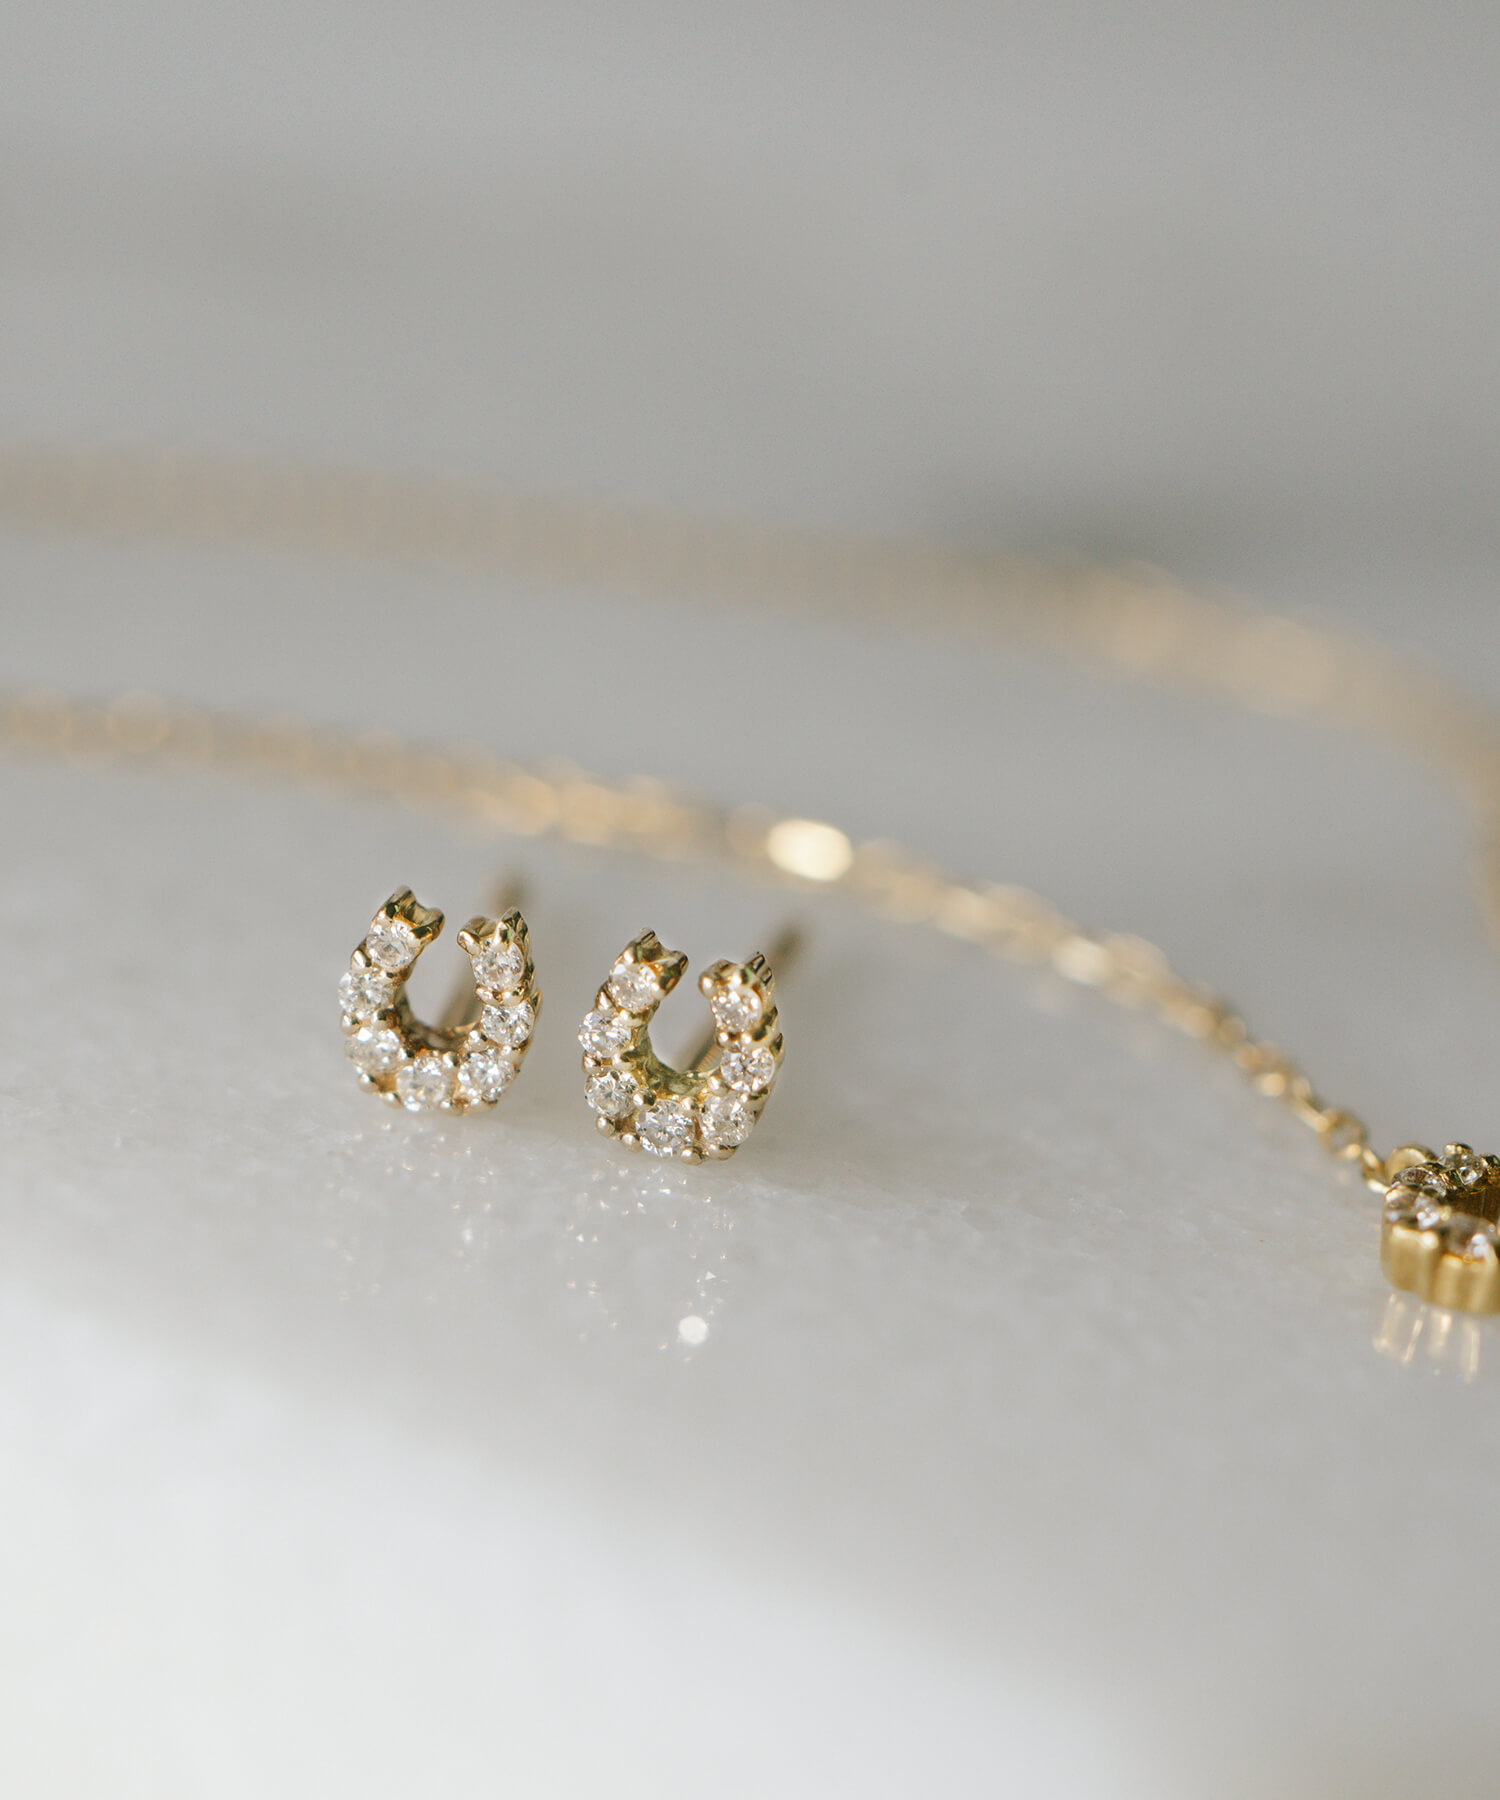 Tiny Diamond Motif Gold Necklace MELE NK -メレネックレス- | Ops